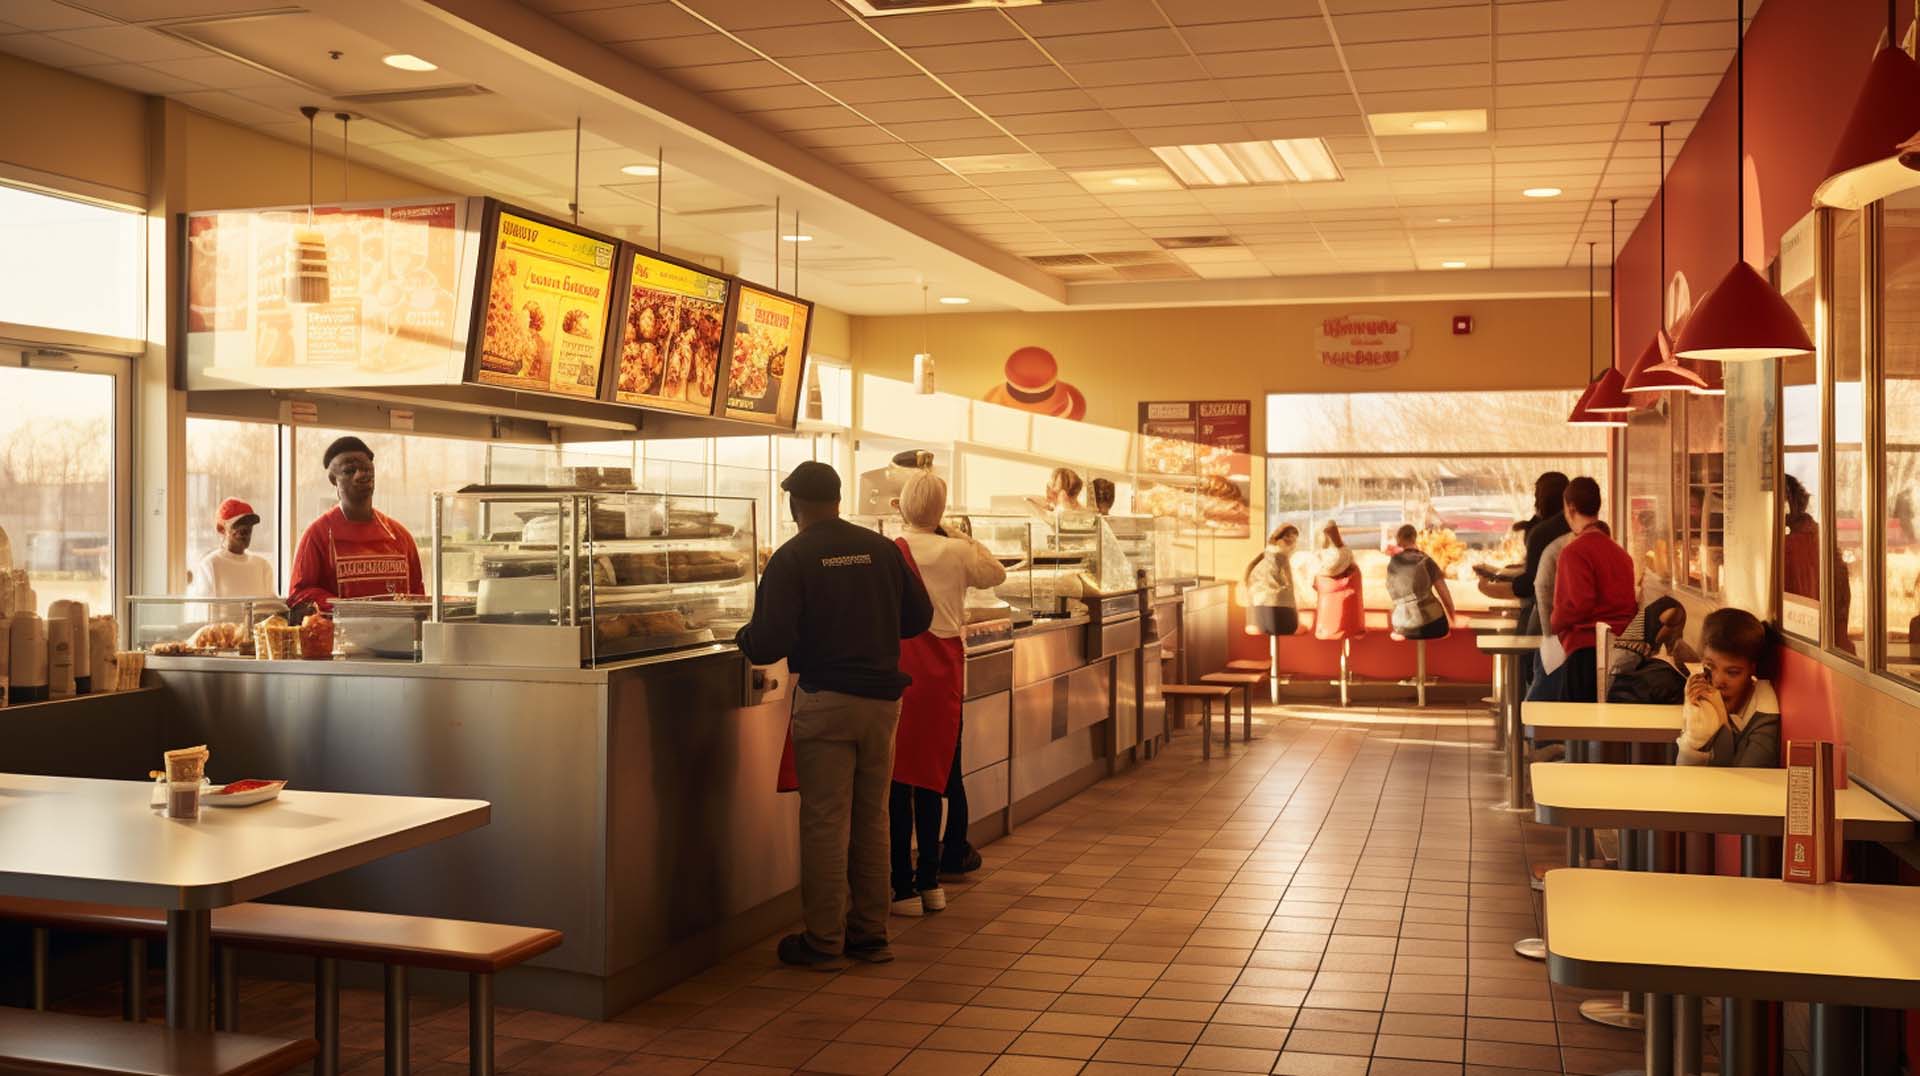 Union City has a wide variety of delicious fast food options to choose from.